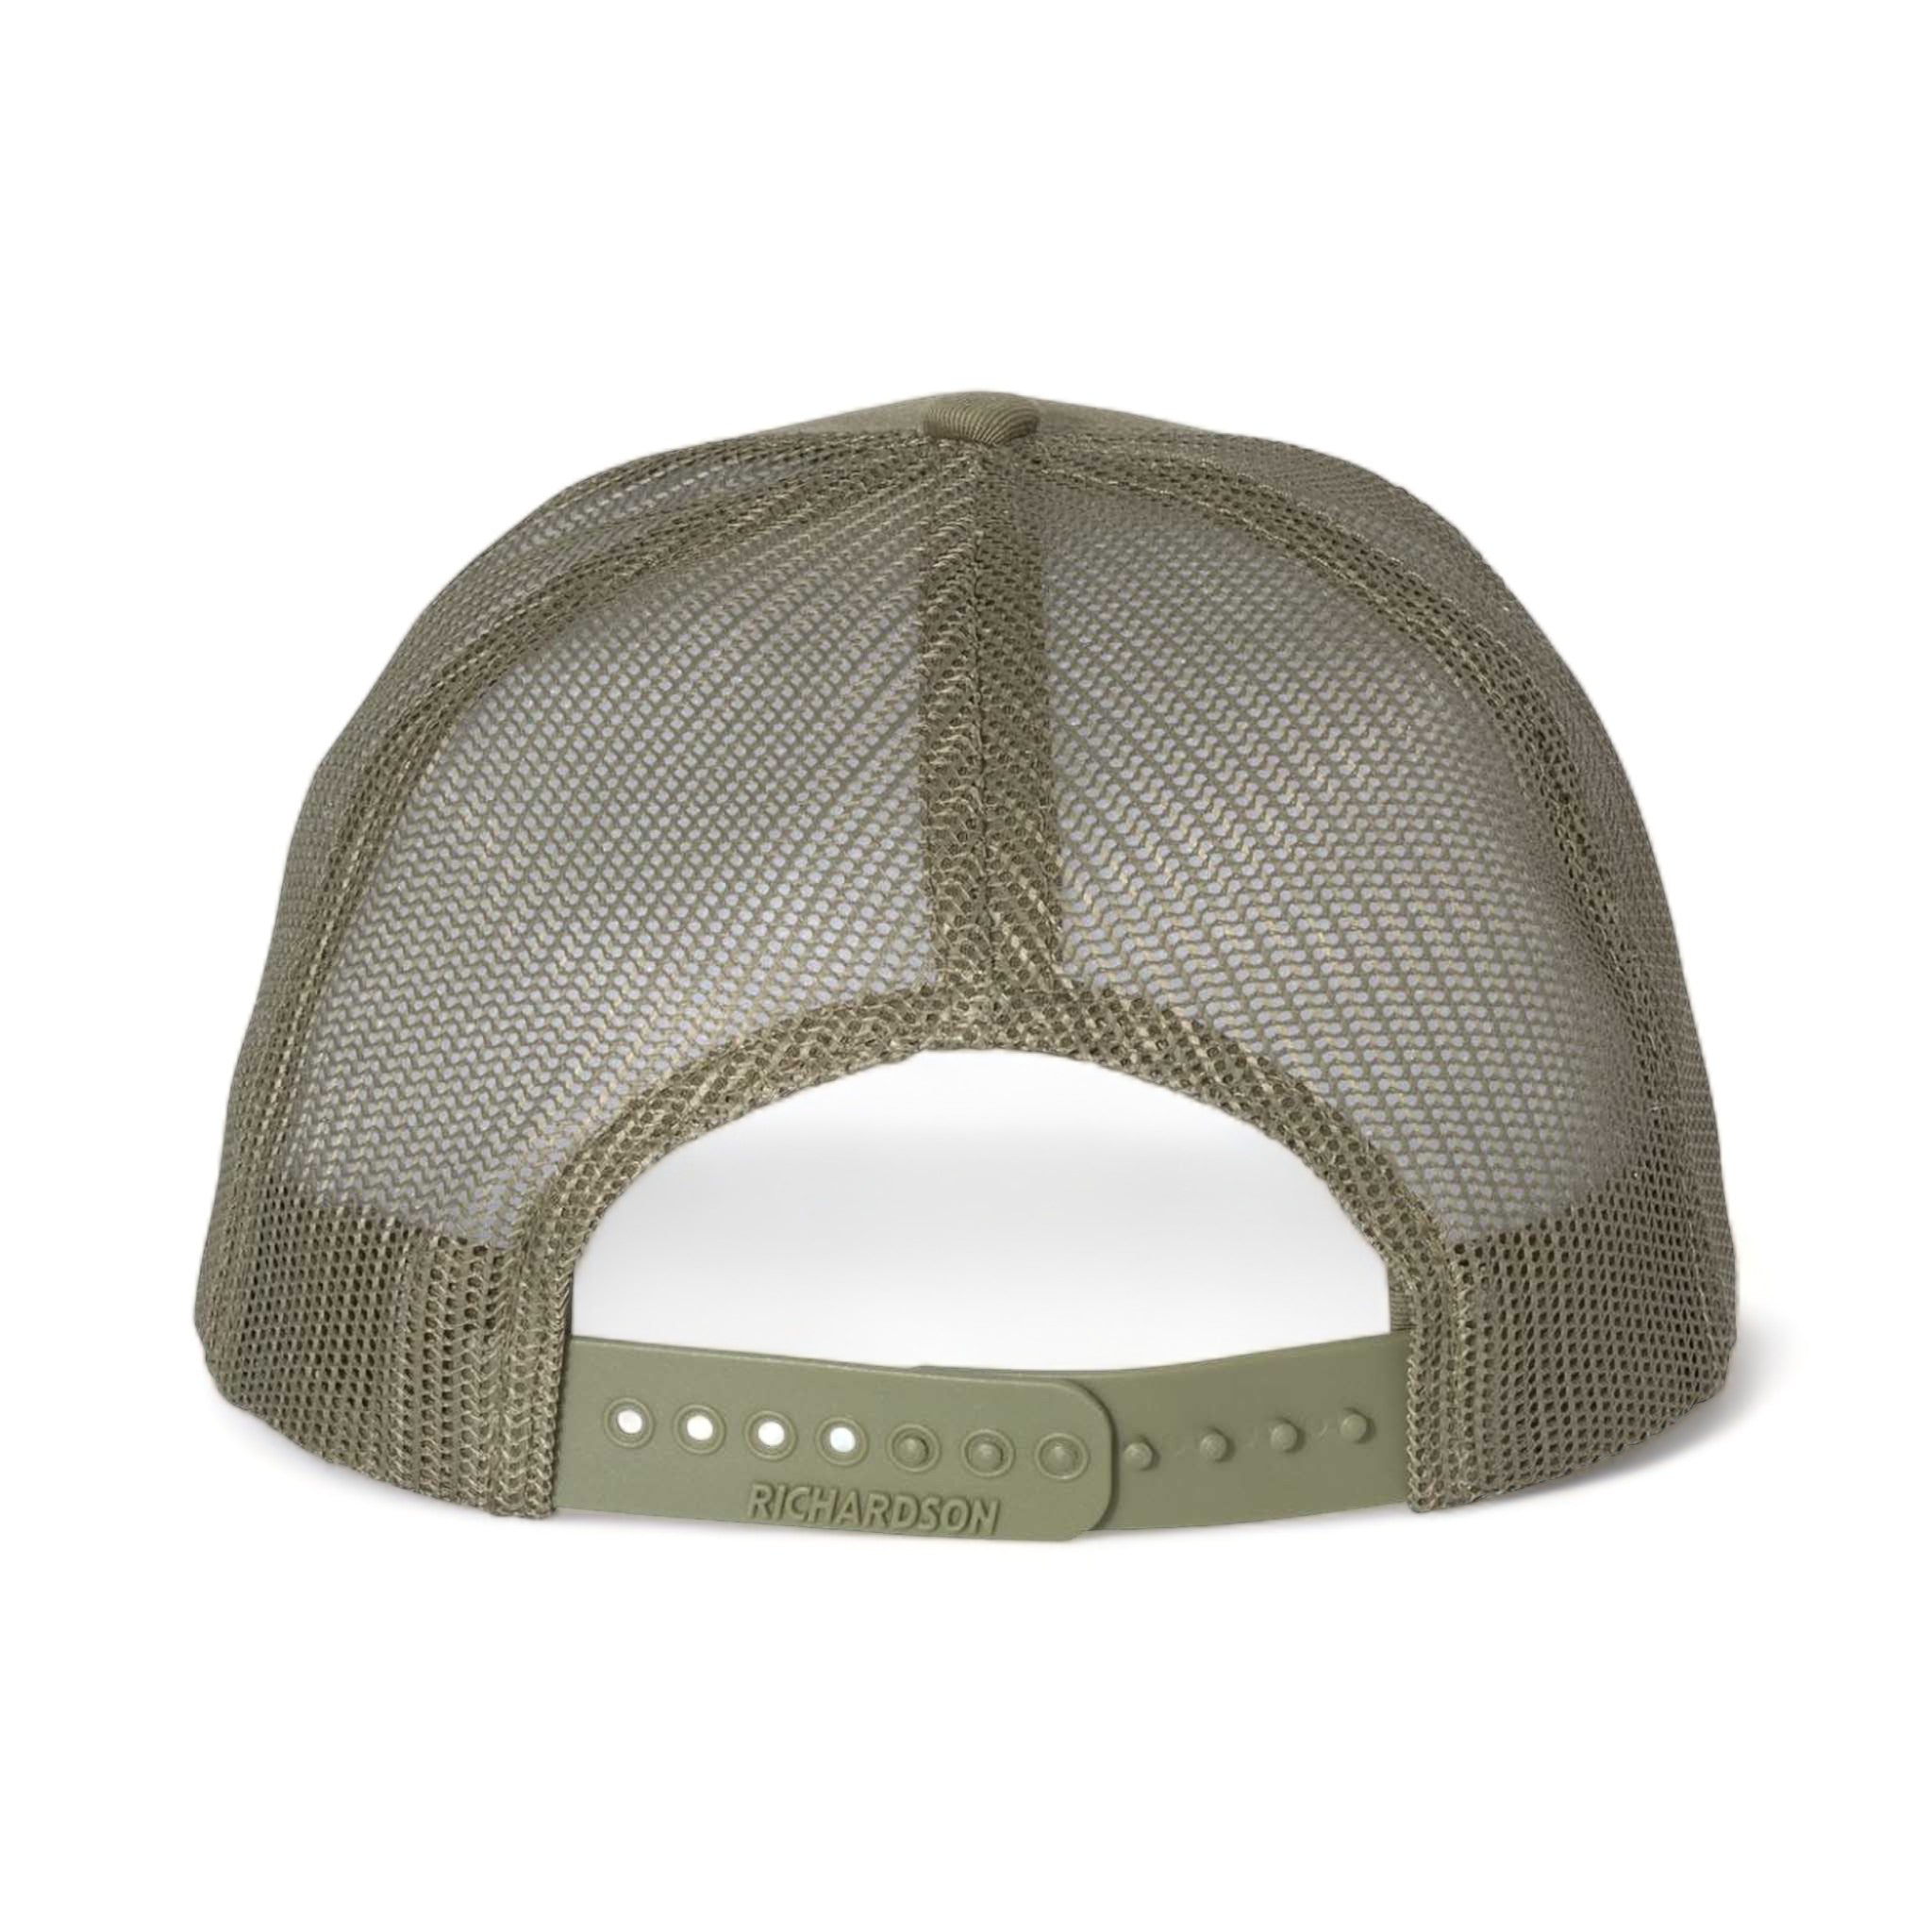 Back view of Richardson 112 custom hat in loden